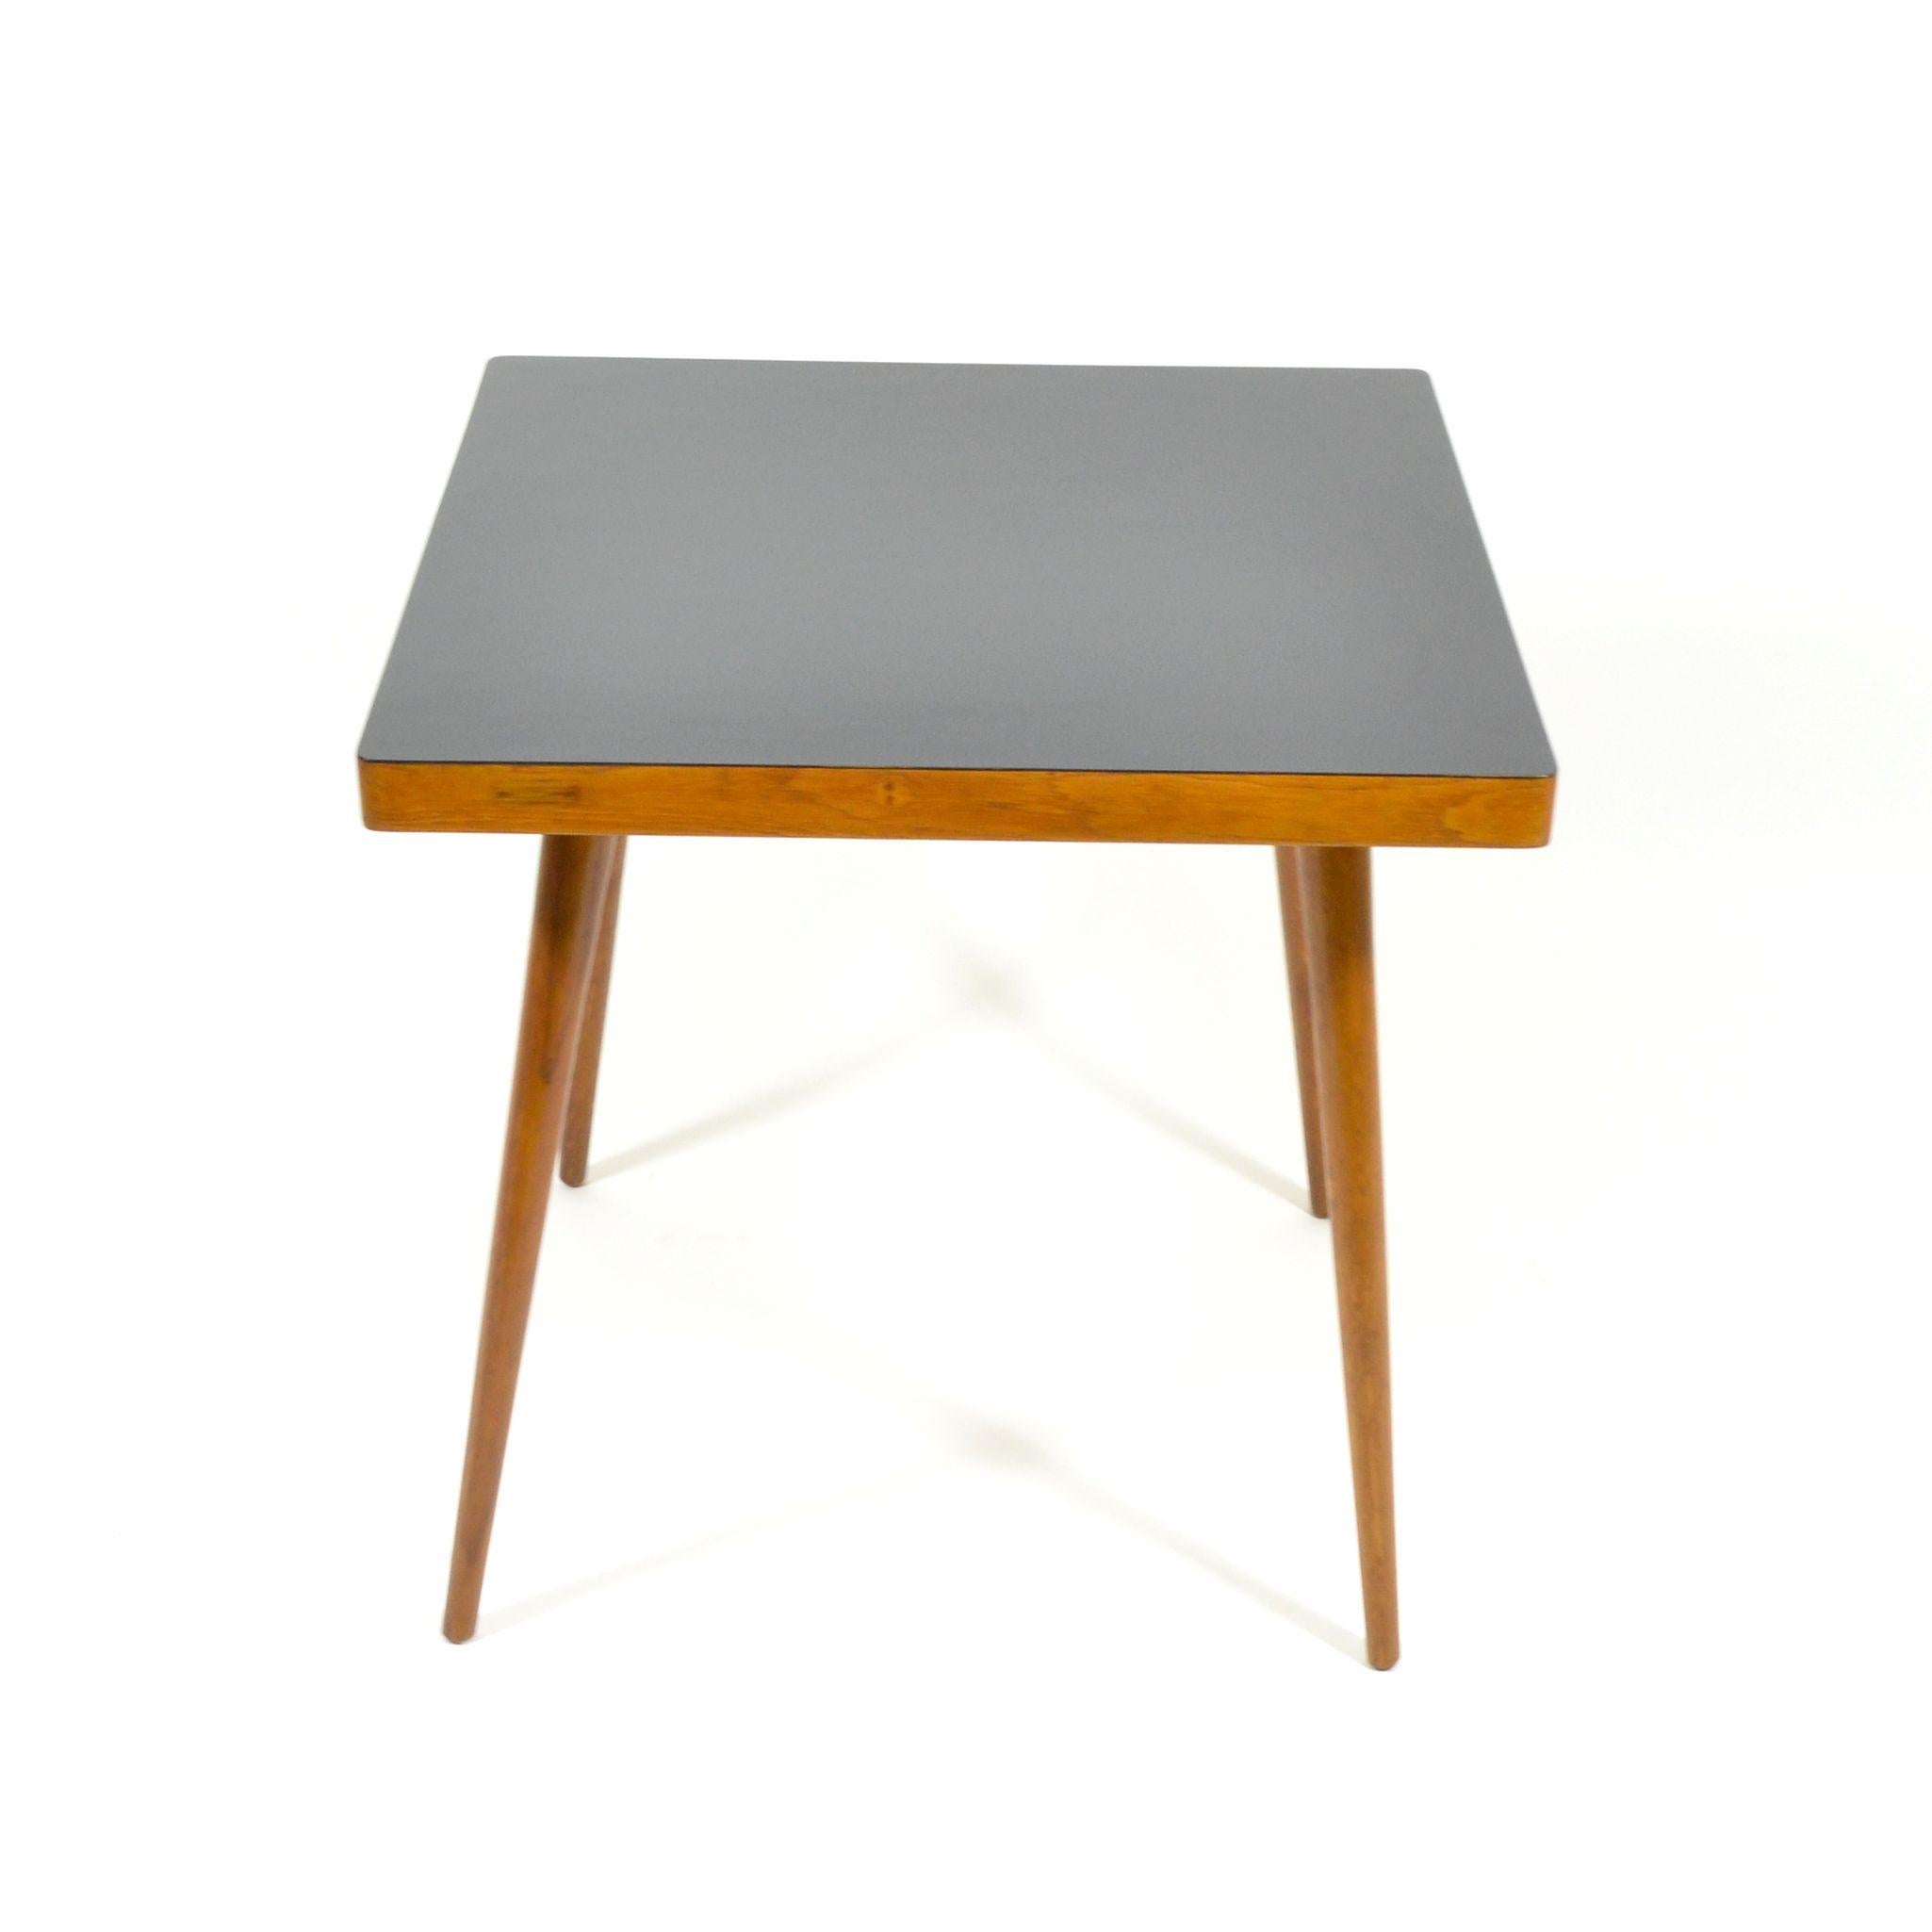 Late 20th Century Vintage Coffee Table with Black Varnished Desk, 1970s For Sale